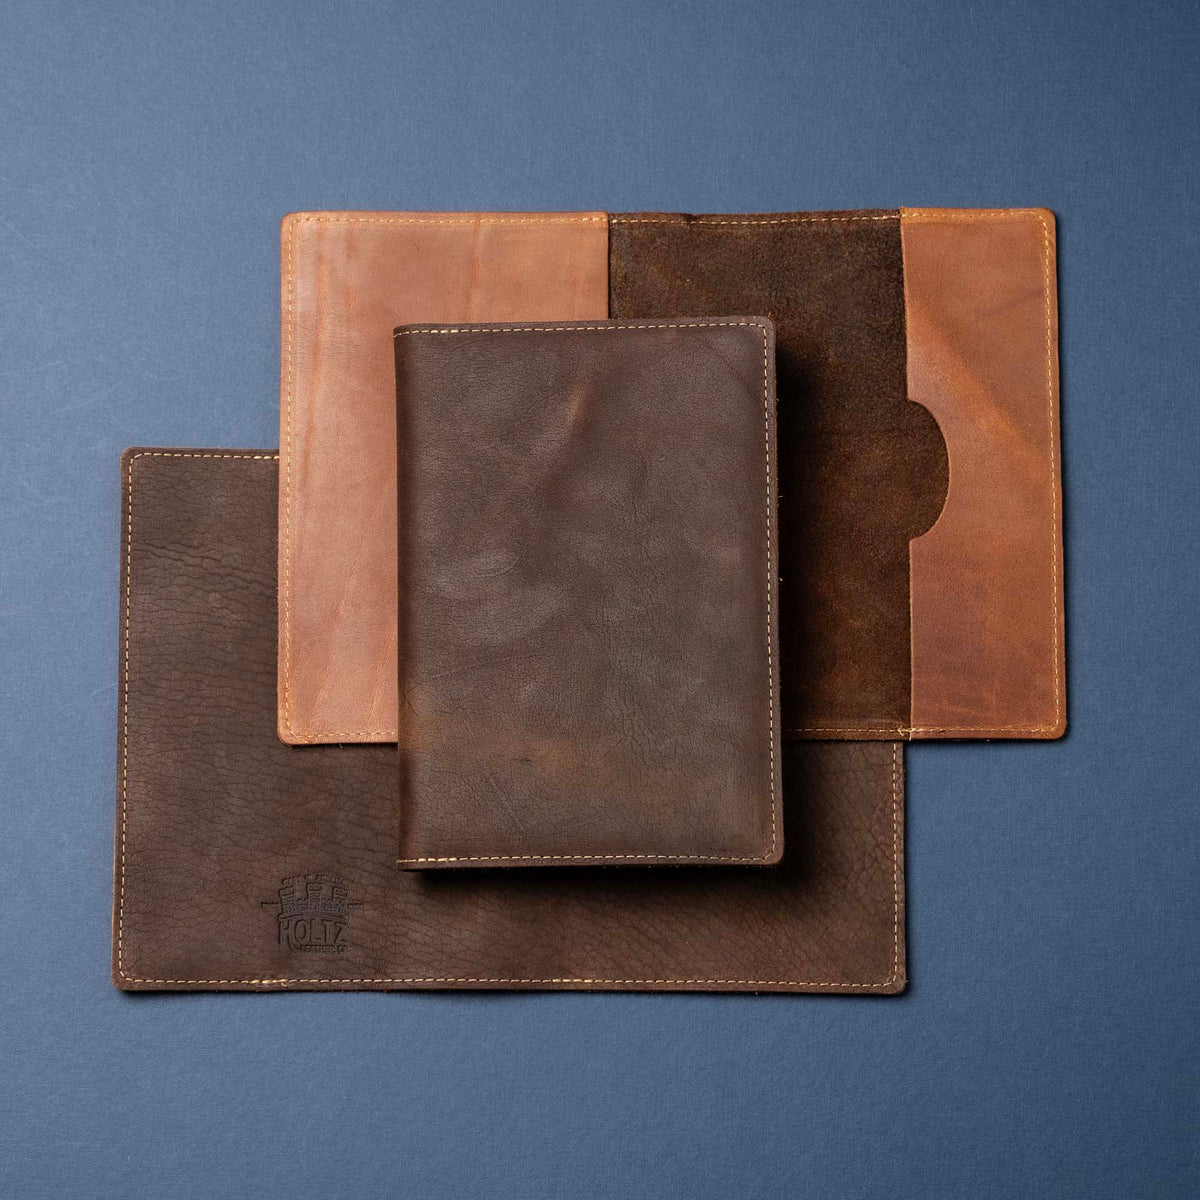 Santa Fe Cowhide - A5 Leather Journal - High Character (One-Of-A-Kind) Notebooks - 192 pages 8.75” x 6.25”